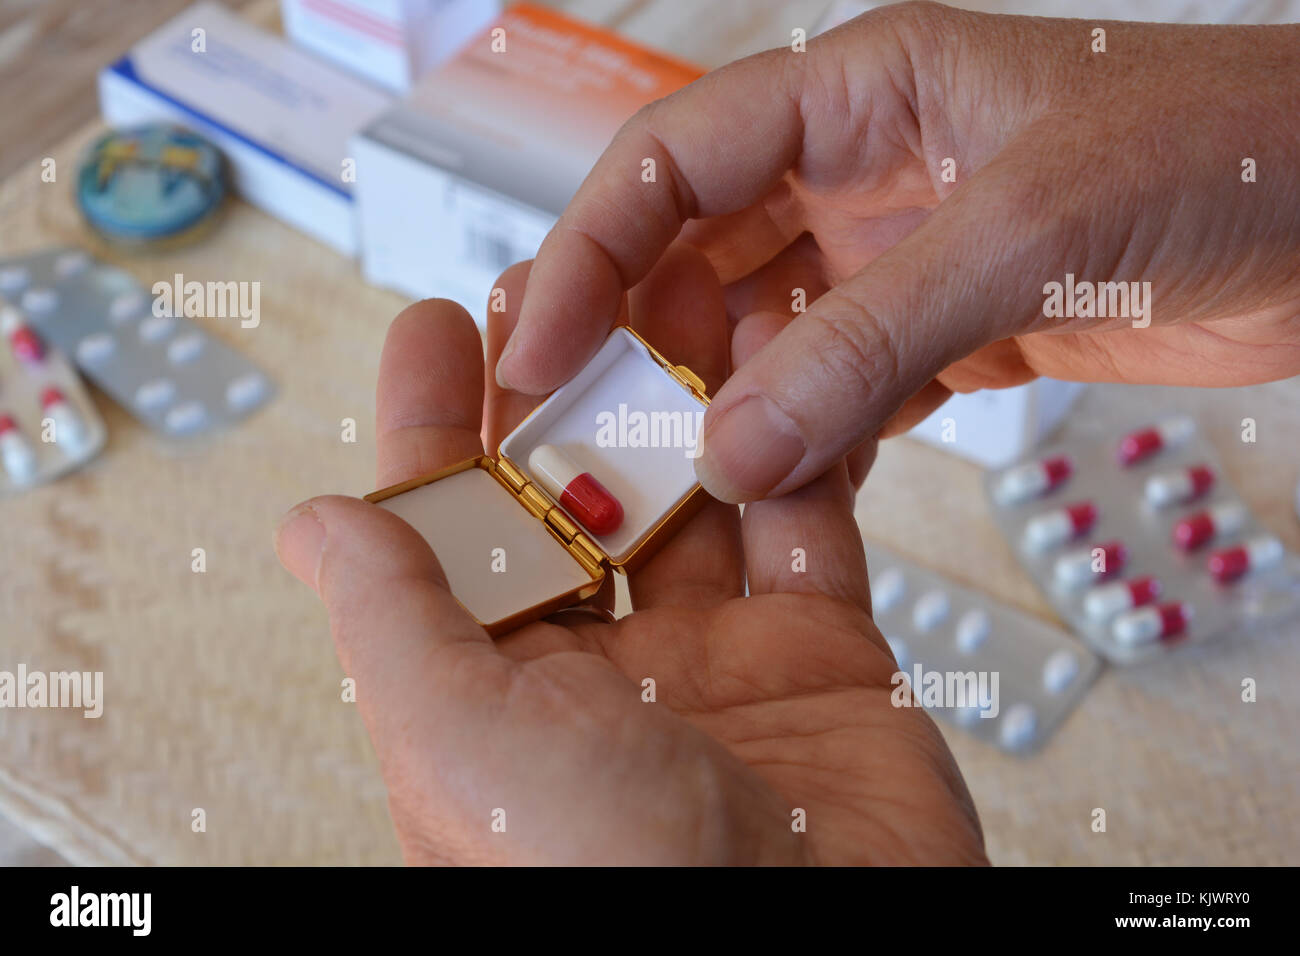 Putting a gel capsule in to a pill box,  to be taken later Stock Photo